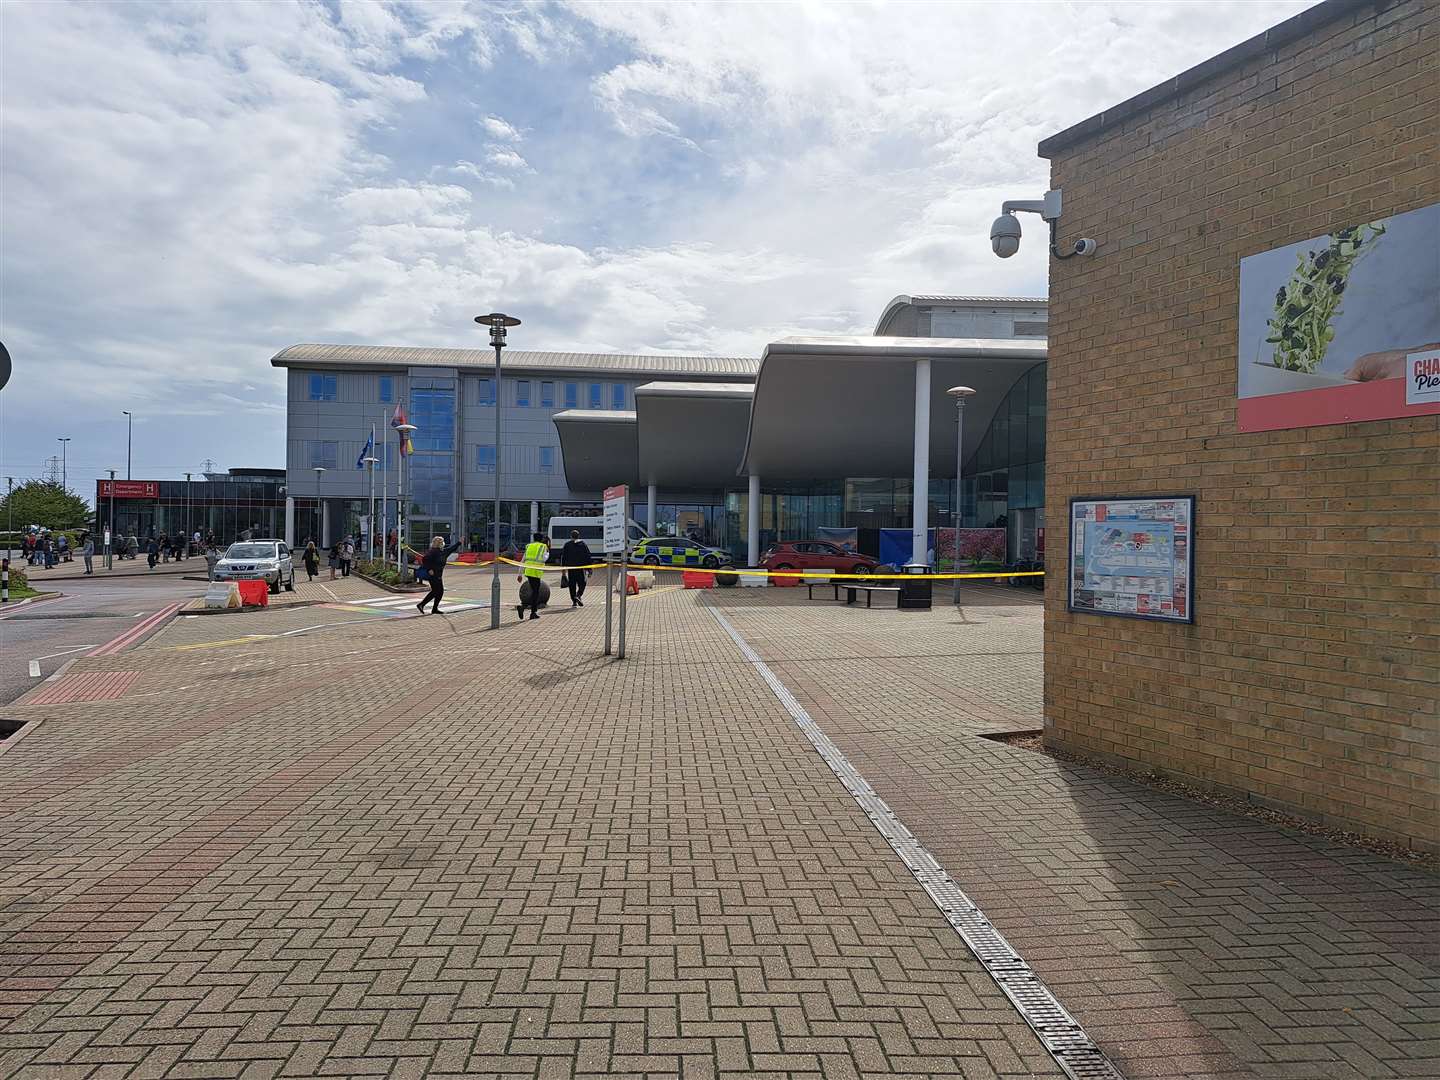 The area around the main entrance at Darent Valley Hospital has been cordoned off after a car smashed through the glass this morning